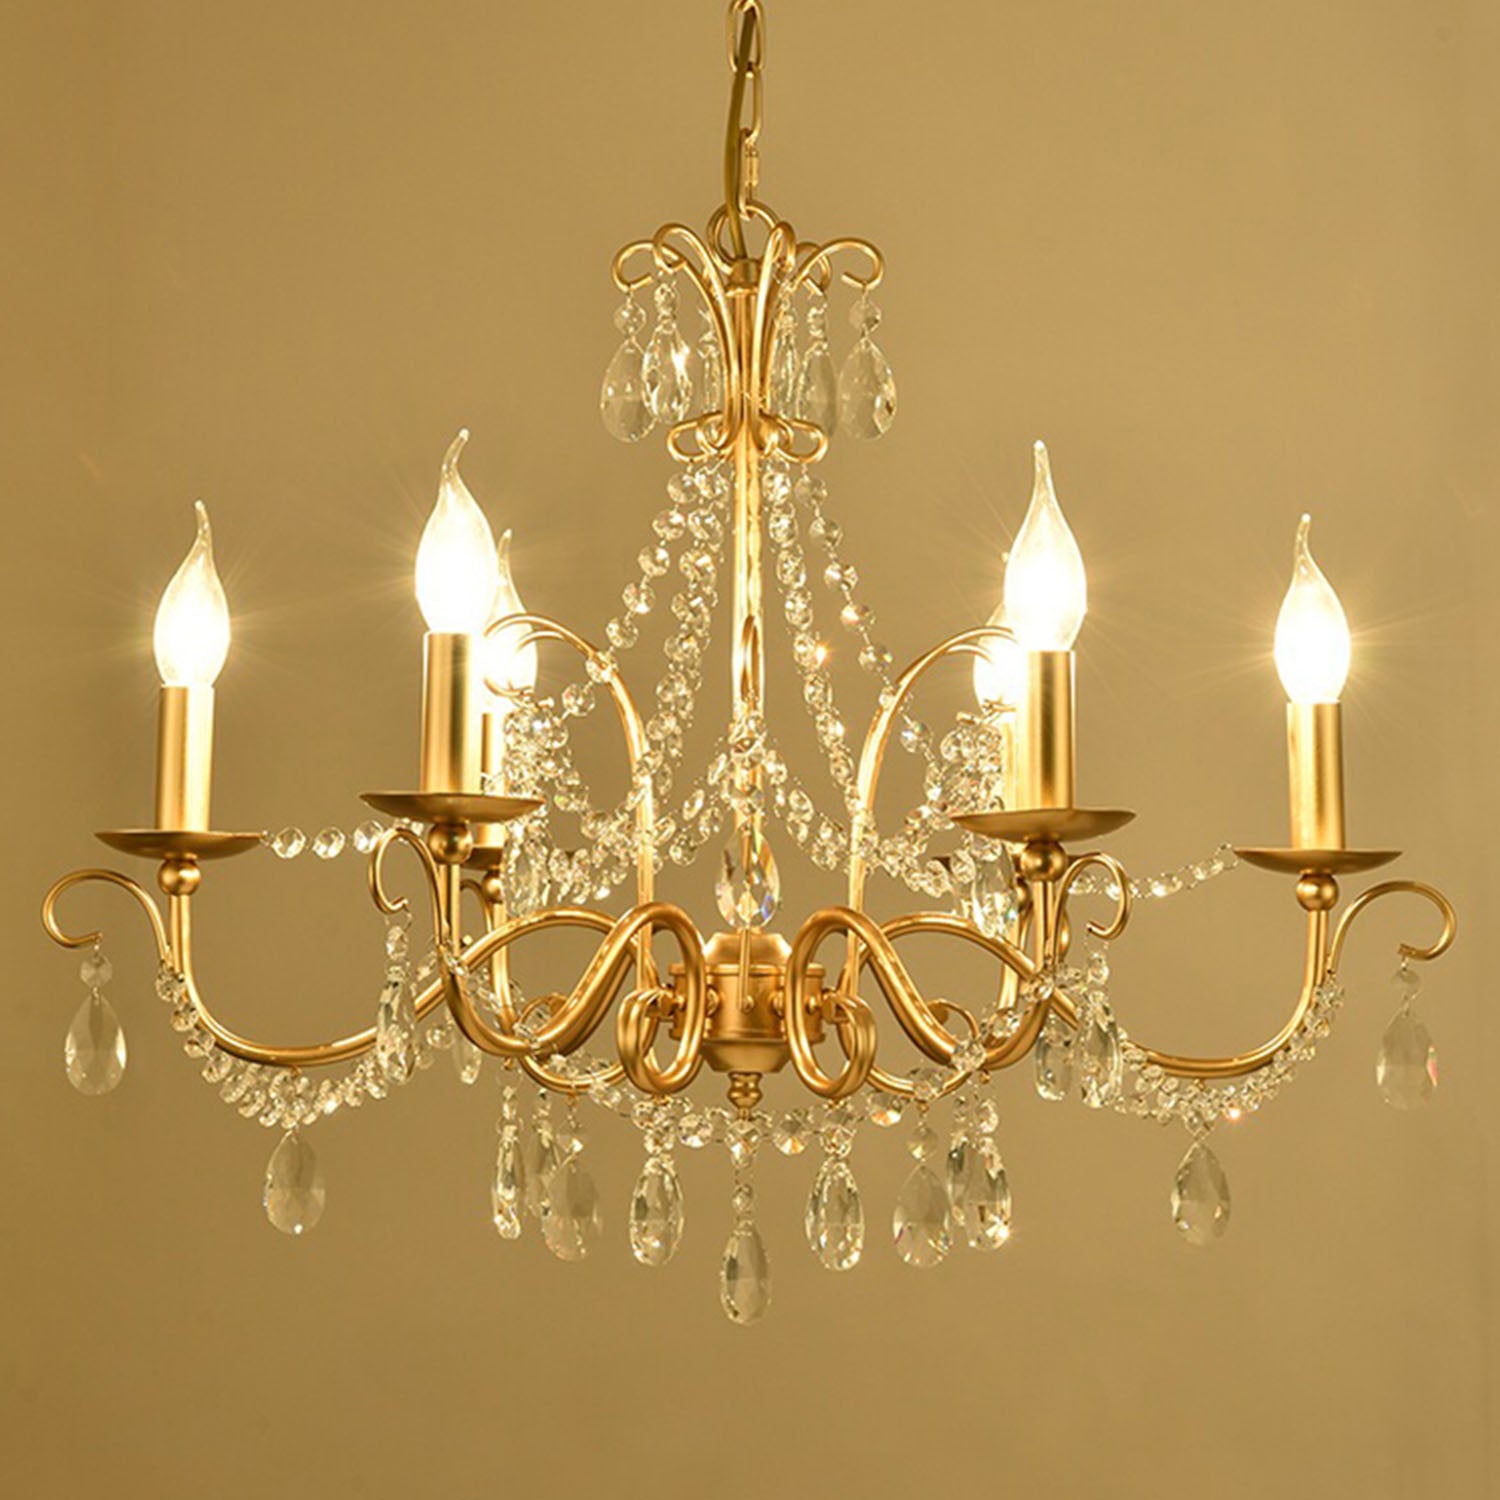 Gold Metal Candle Style Crystal Chandelier - Warm Light